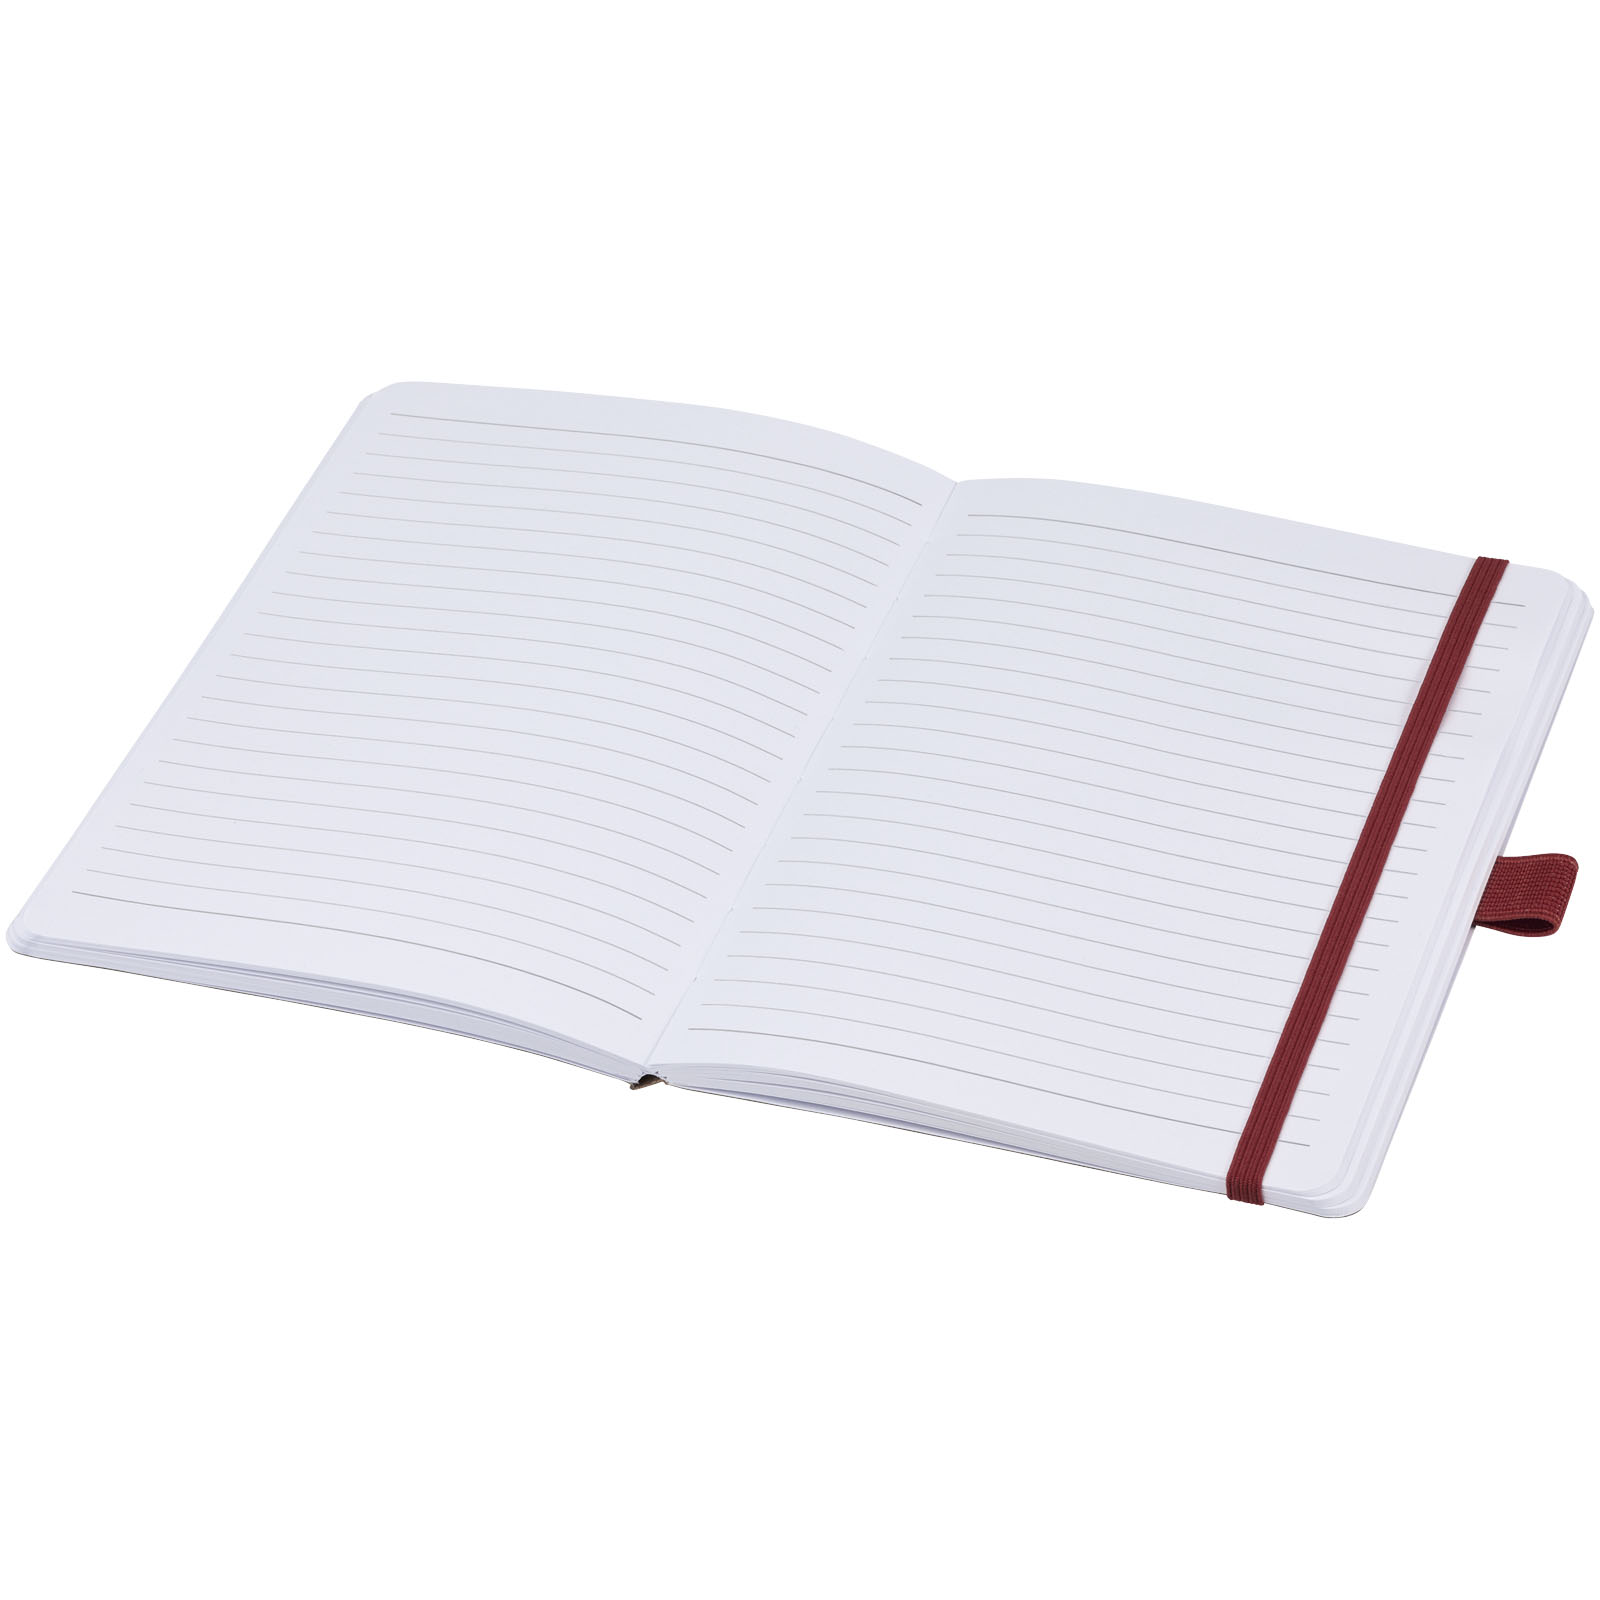 Advertising Soft cover notebooks - Berk recycled paper notebook - 3